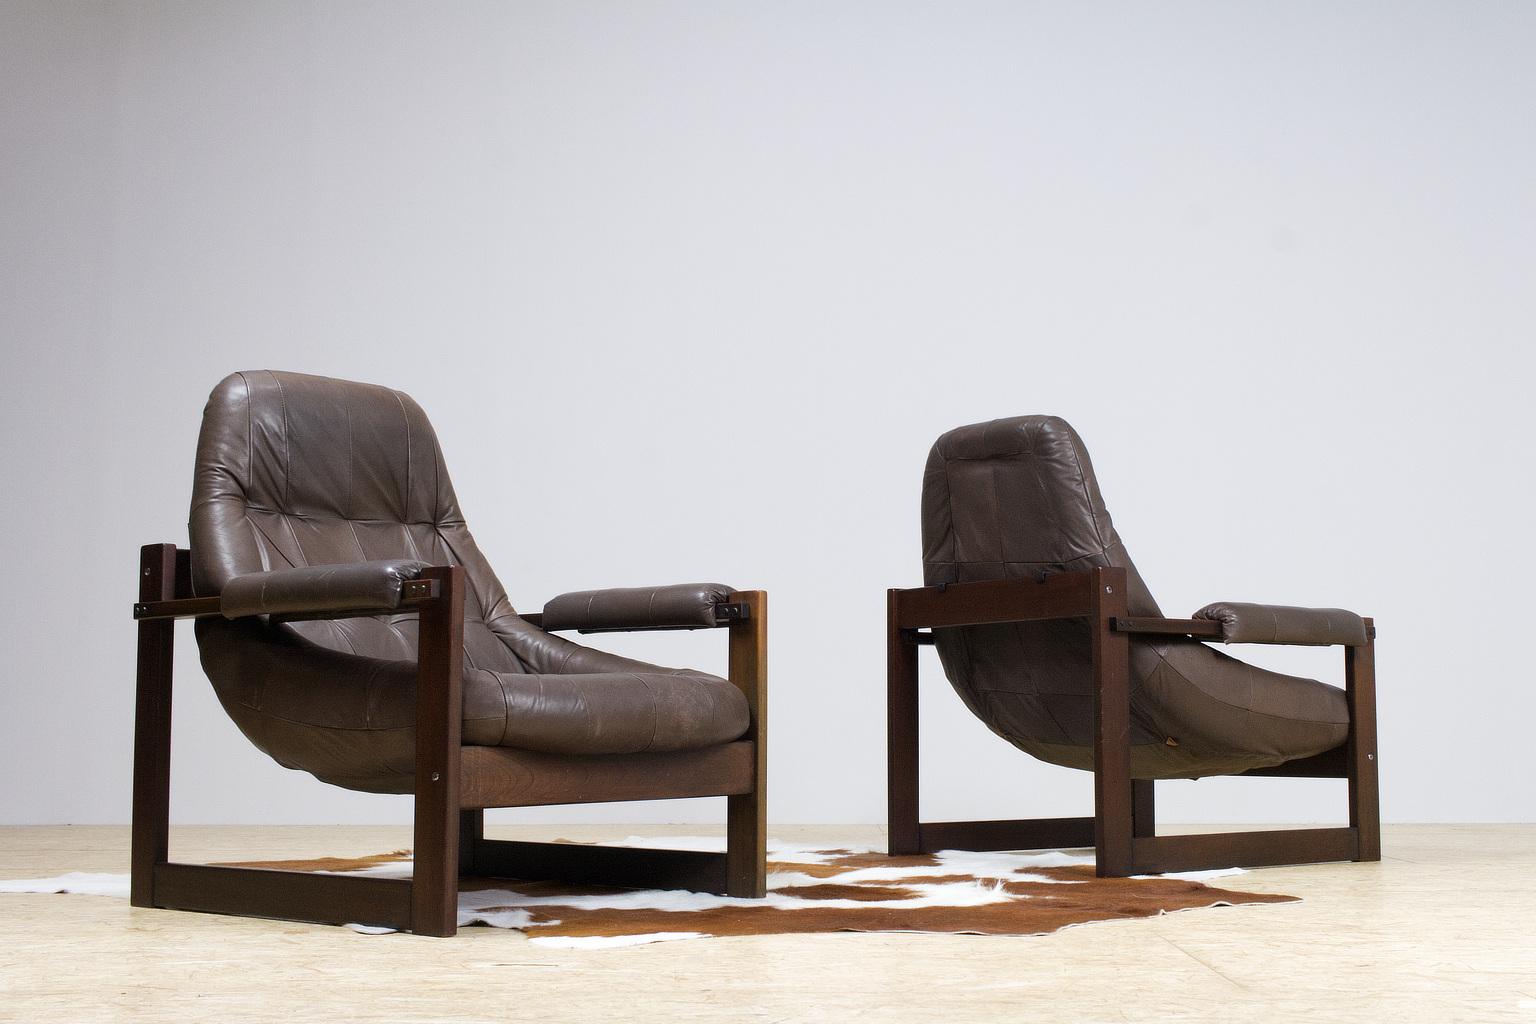 Great set of matching leather lounge chairs by Percival Lafer, 1960-1970s Brazilian modern. The massive wooden cubical frame holds the 'floating' dark brown leather shell. The hard wooden construction draws the most attention, which is a typically